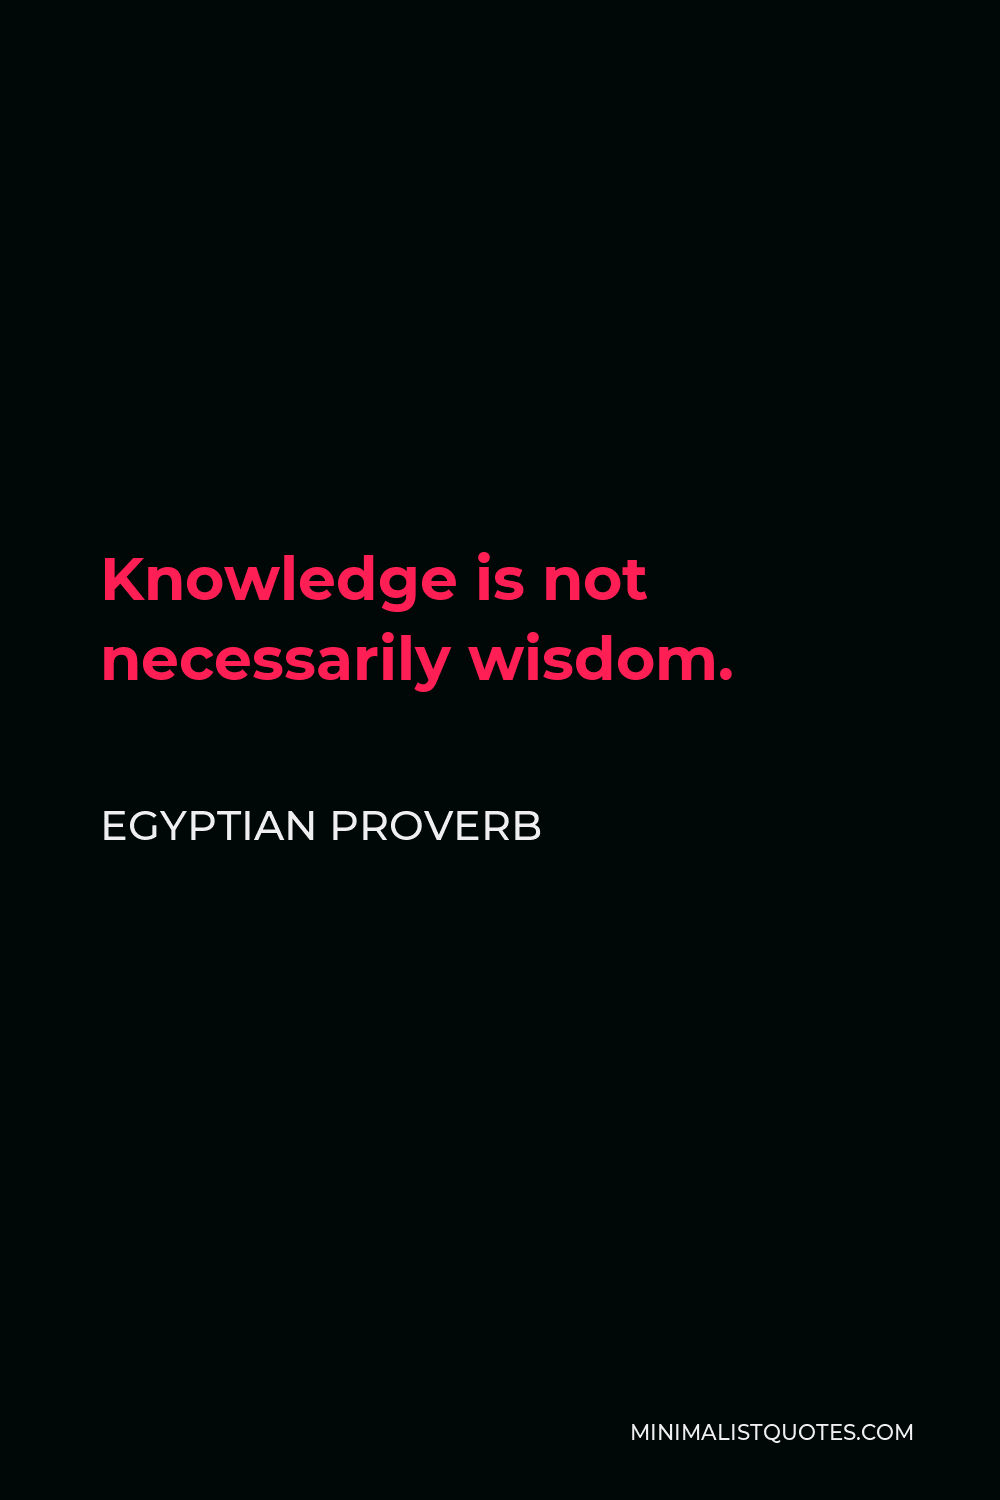 Egyptian Proverb Quote - Knowledge is not necessarily wisdom.